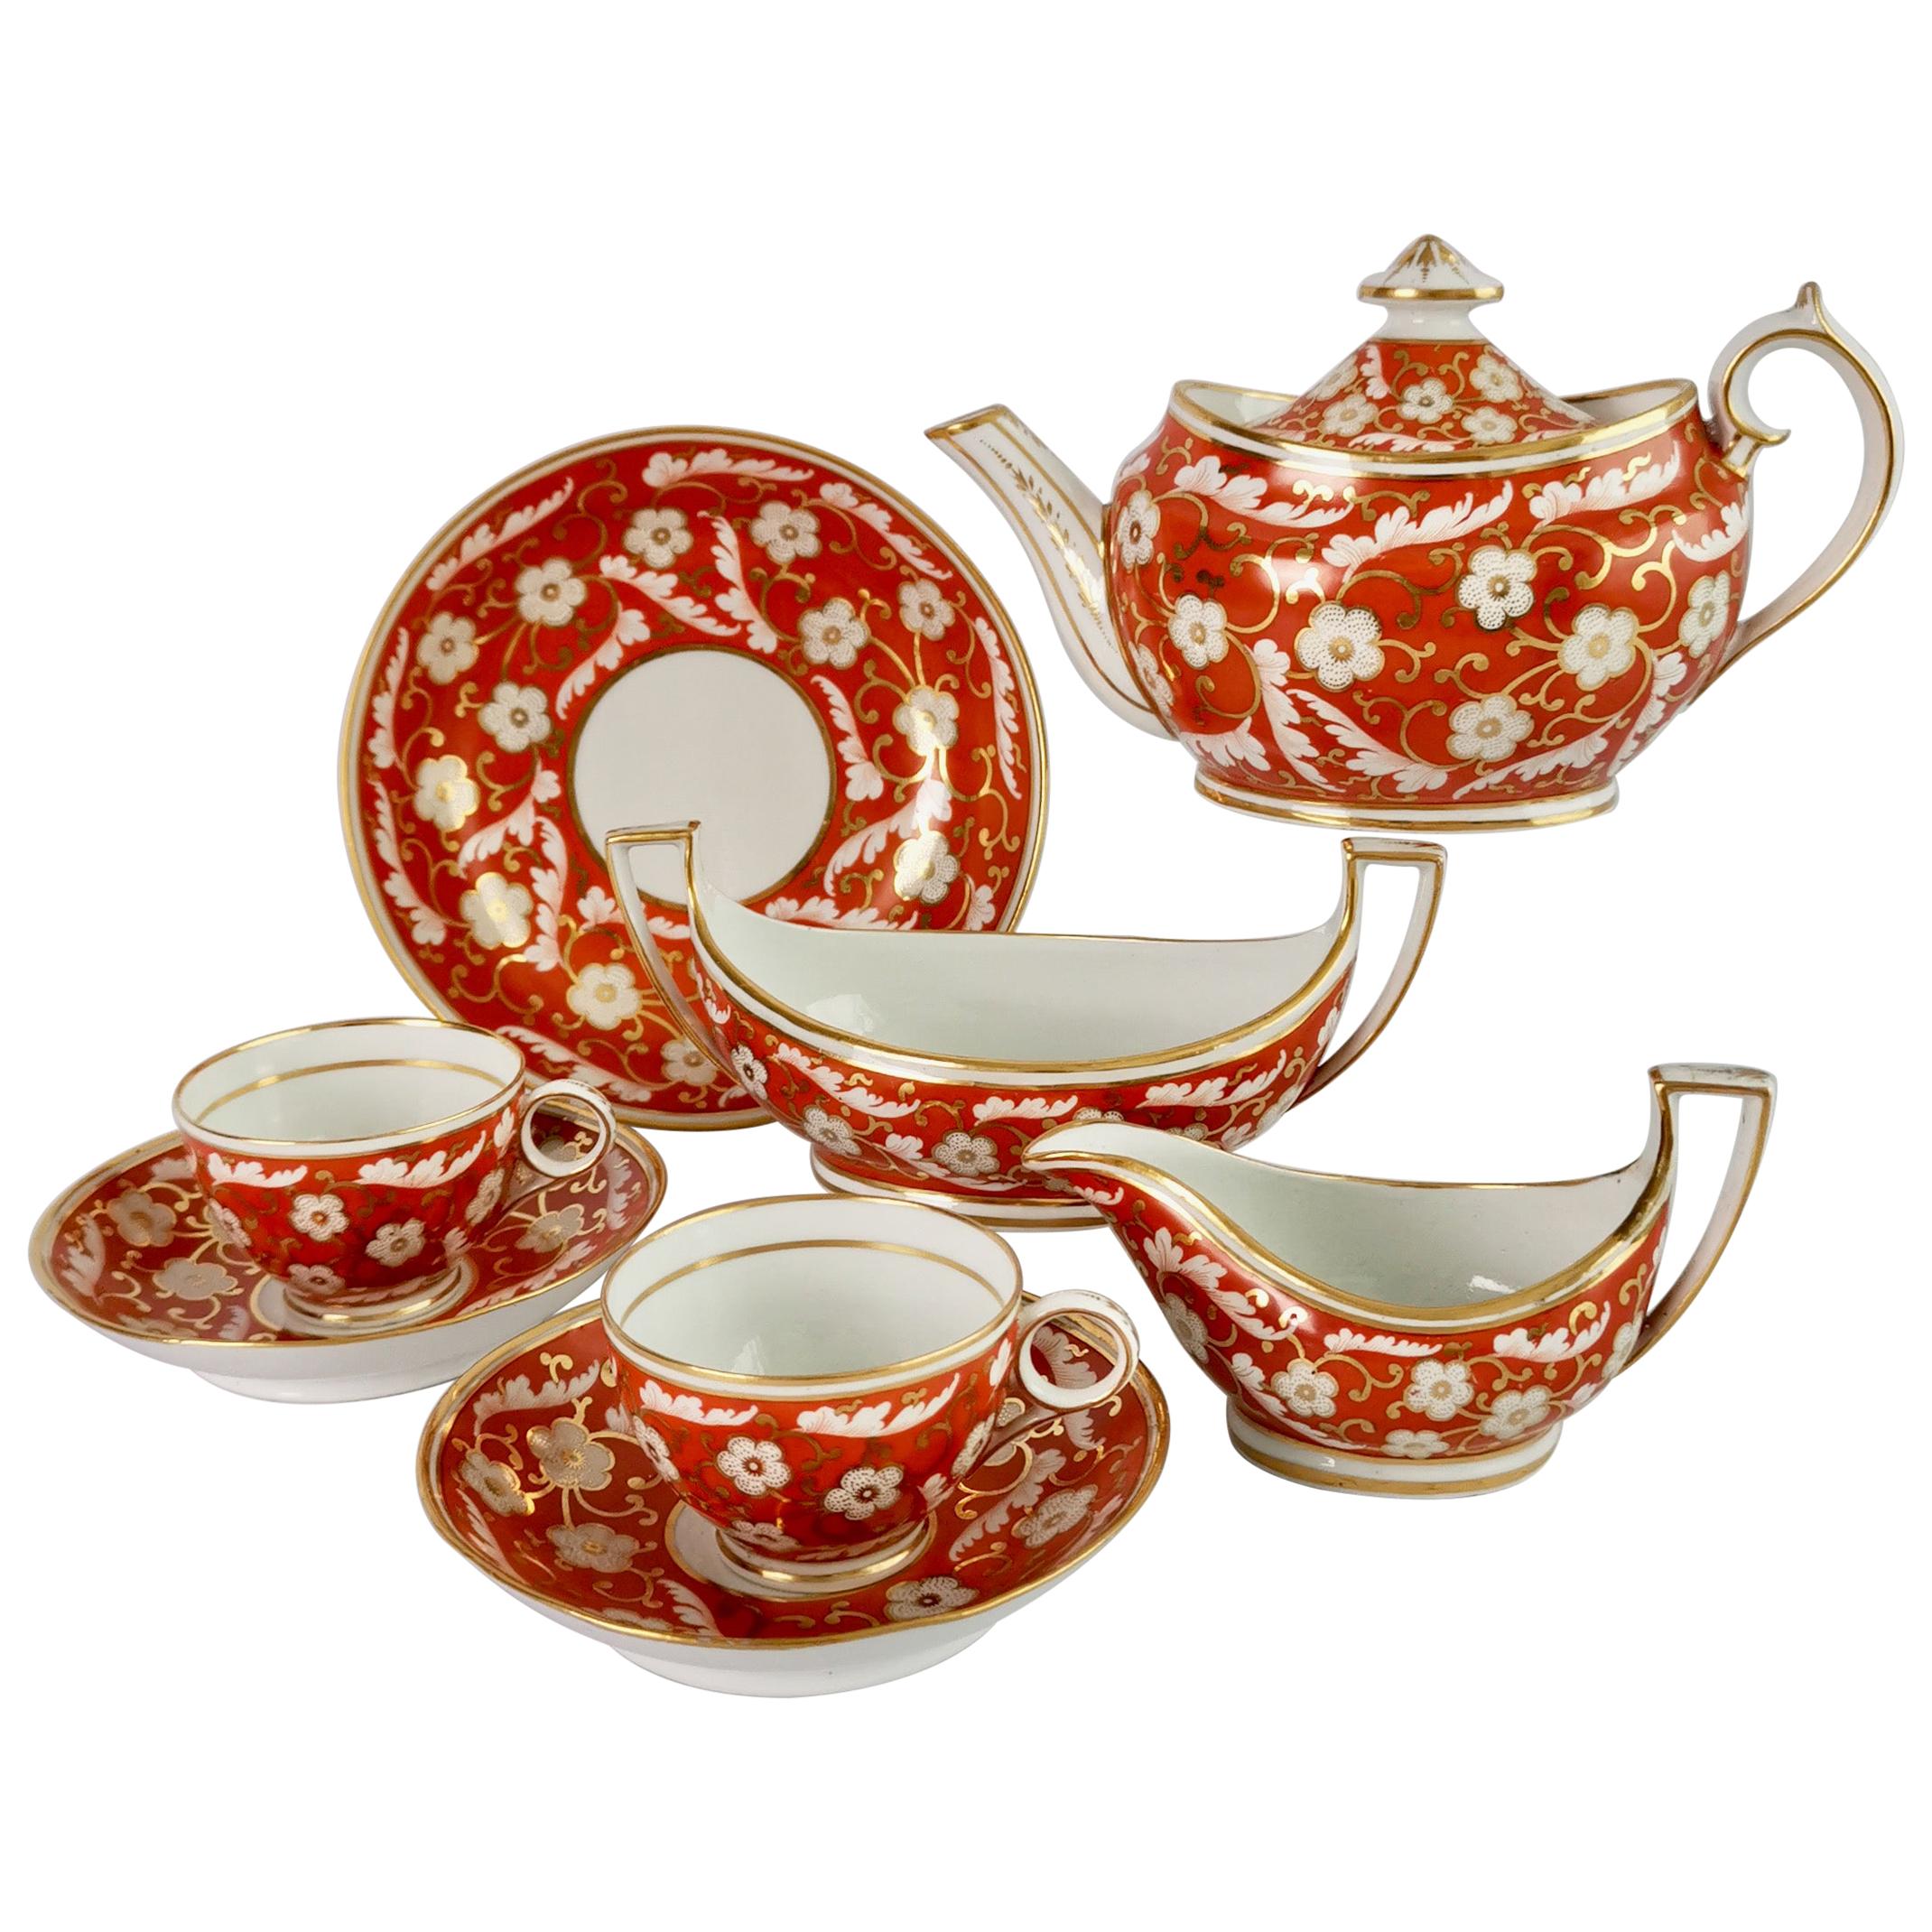 Chamberlains Worcester Tiny Tea Service for Two, Orange Floral, Regency ca 1805